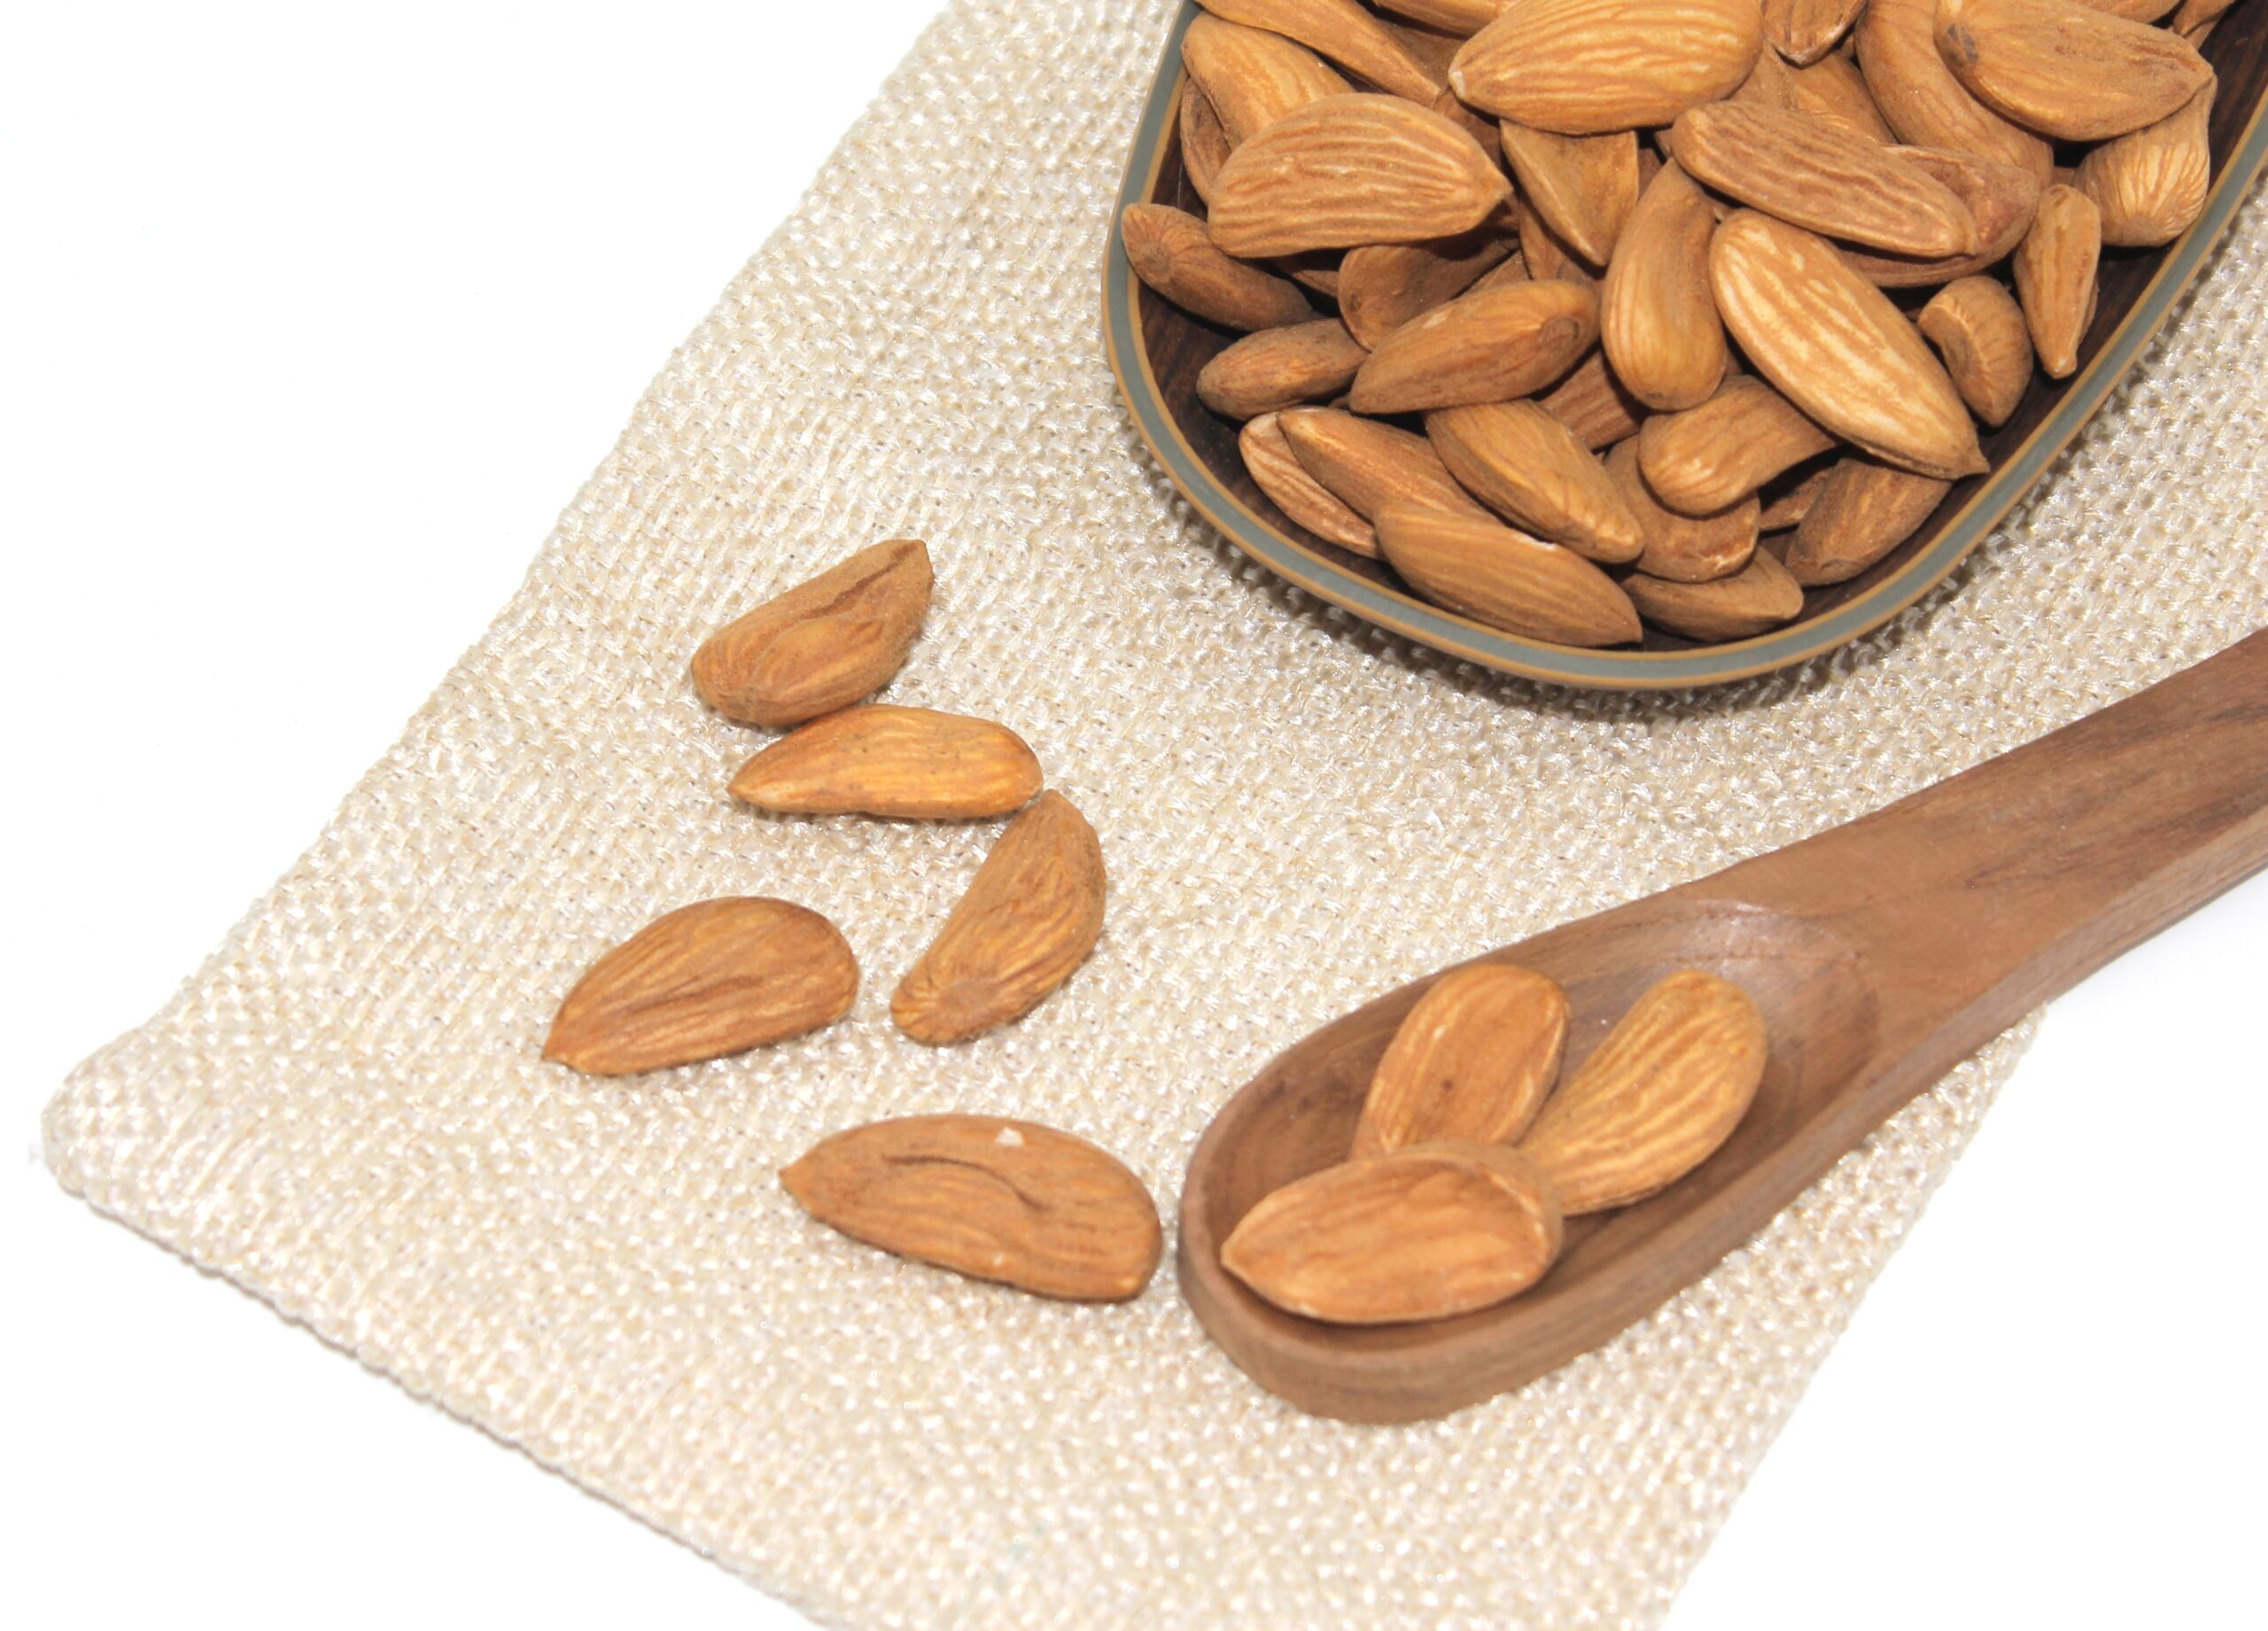 Iranian Mamra almond kernel online store | Nutex Nuts